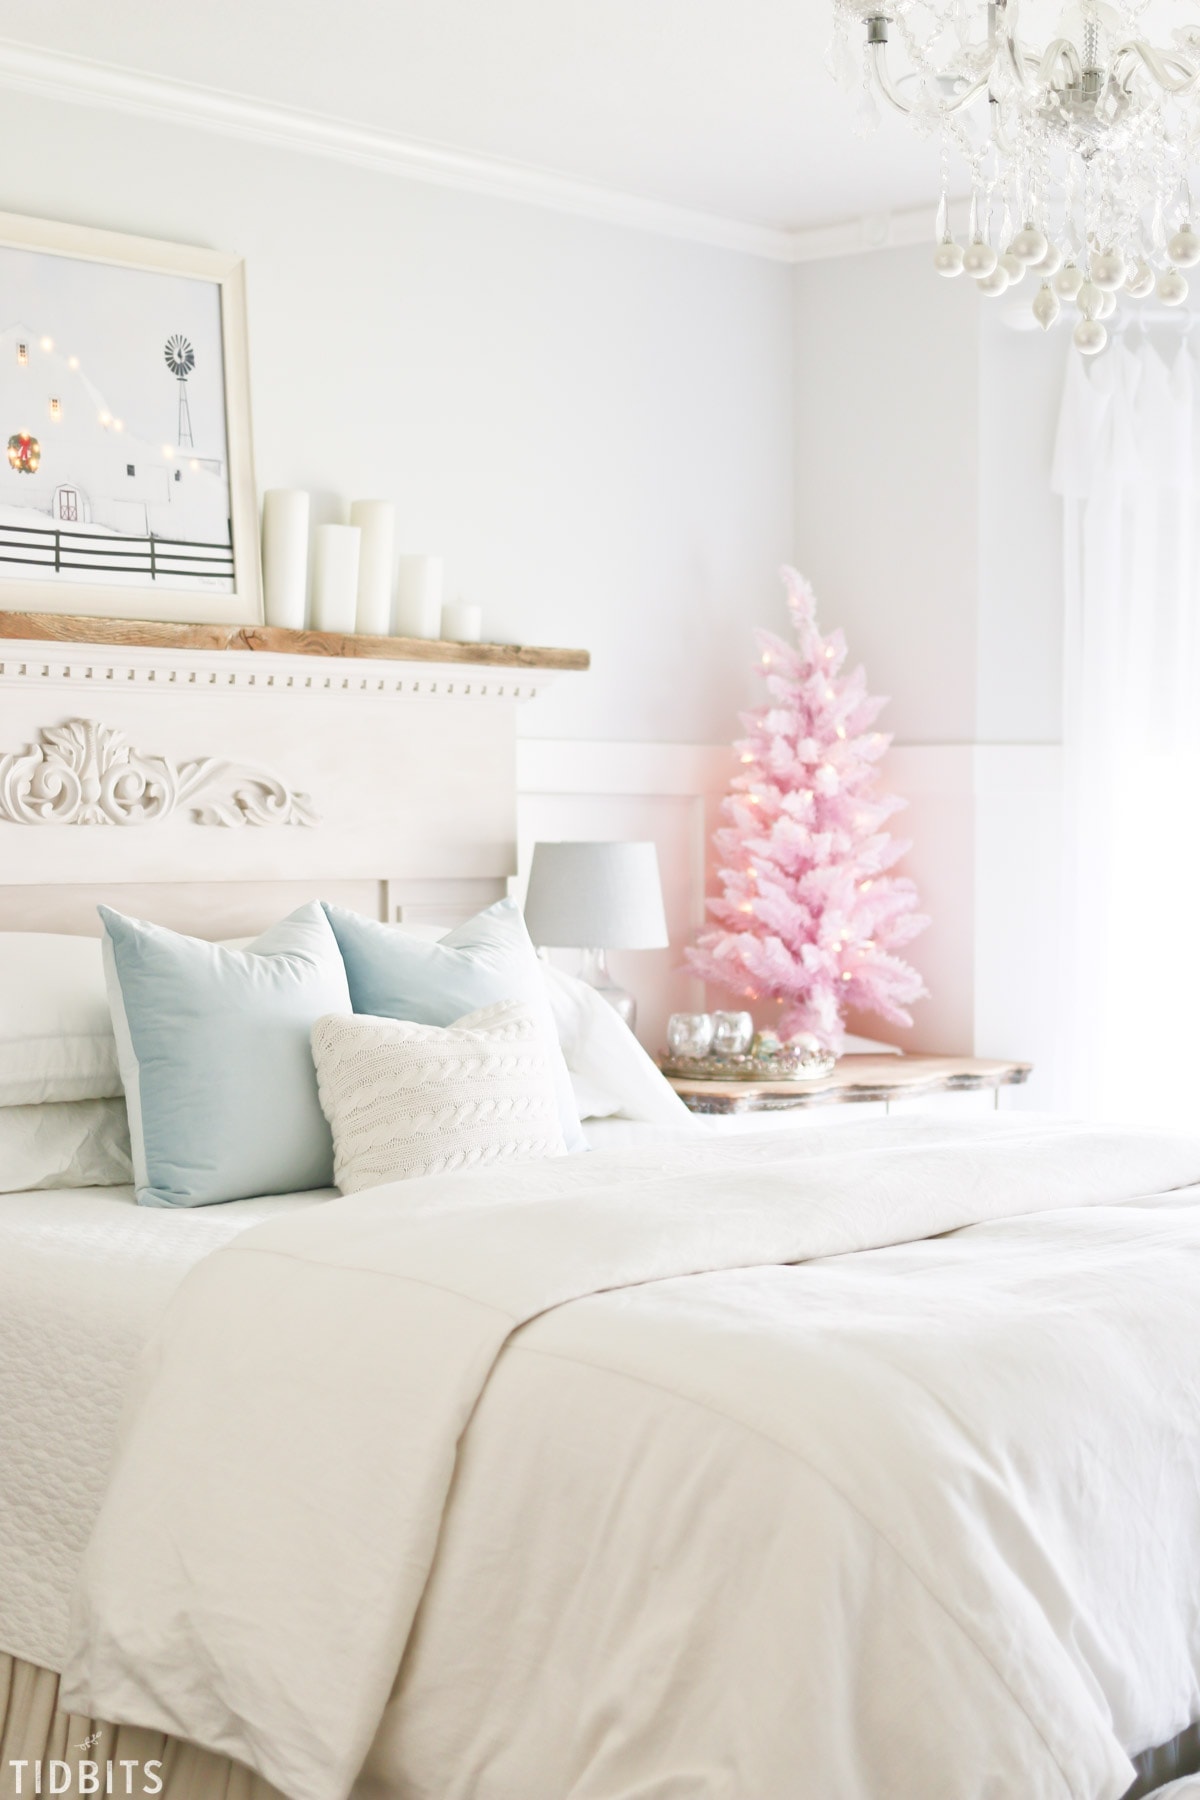 A colorful Christmas master bedroom.